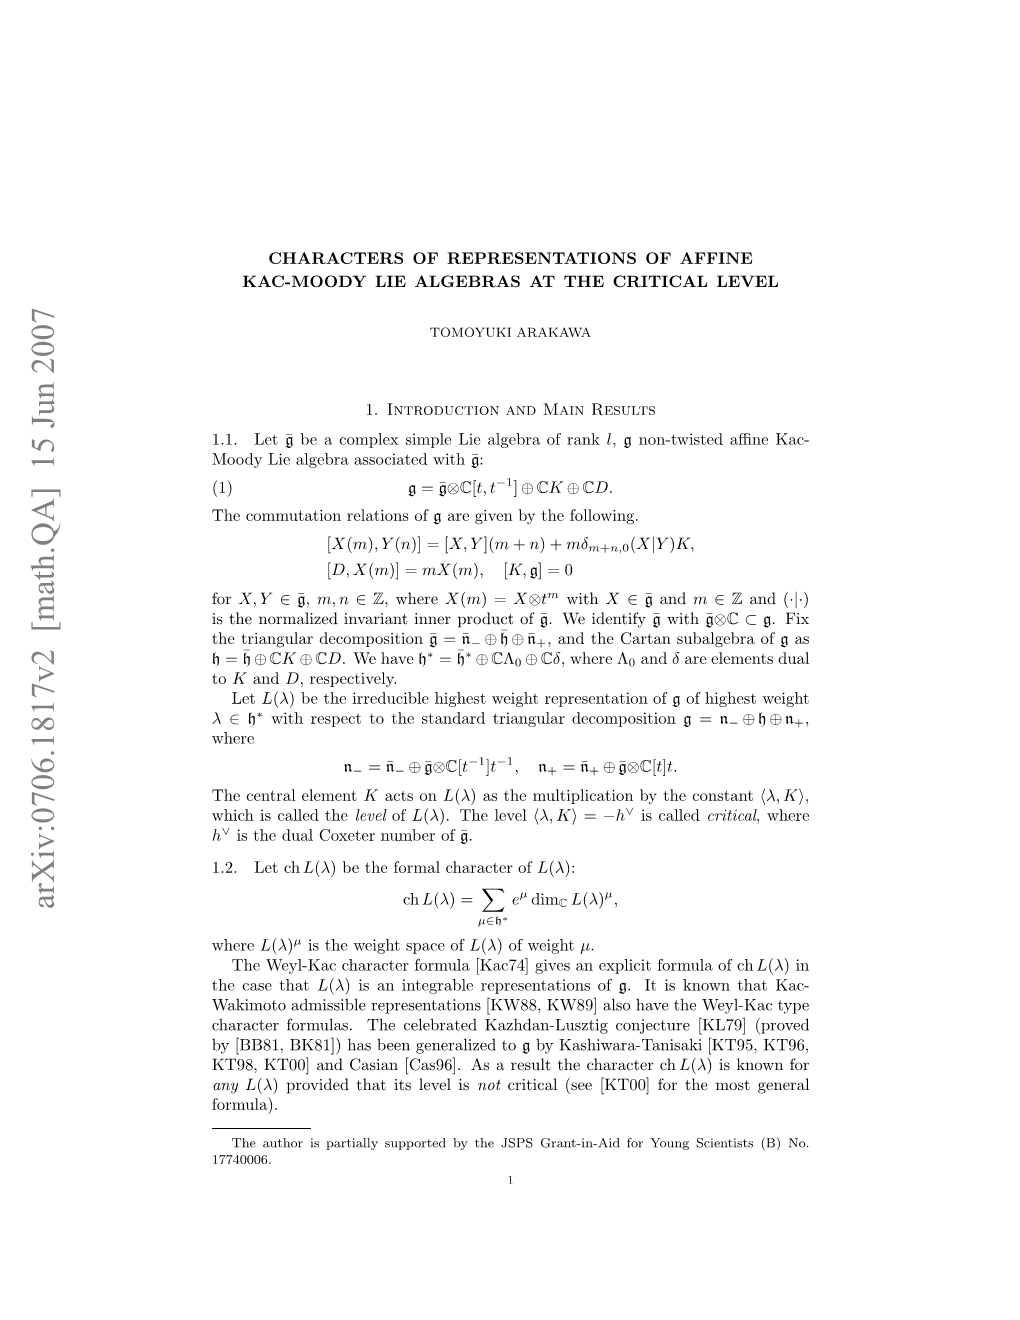 Characters of Representations of Affine Kac-Moody Lie Algebras at The